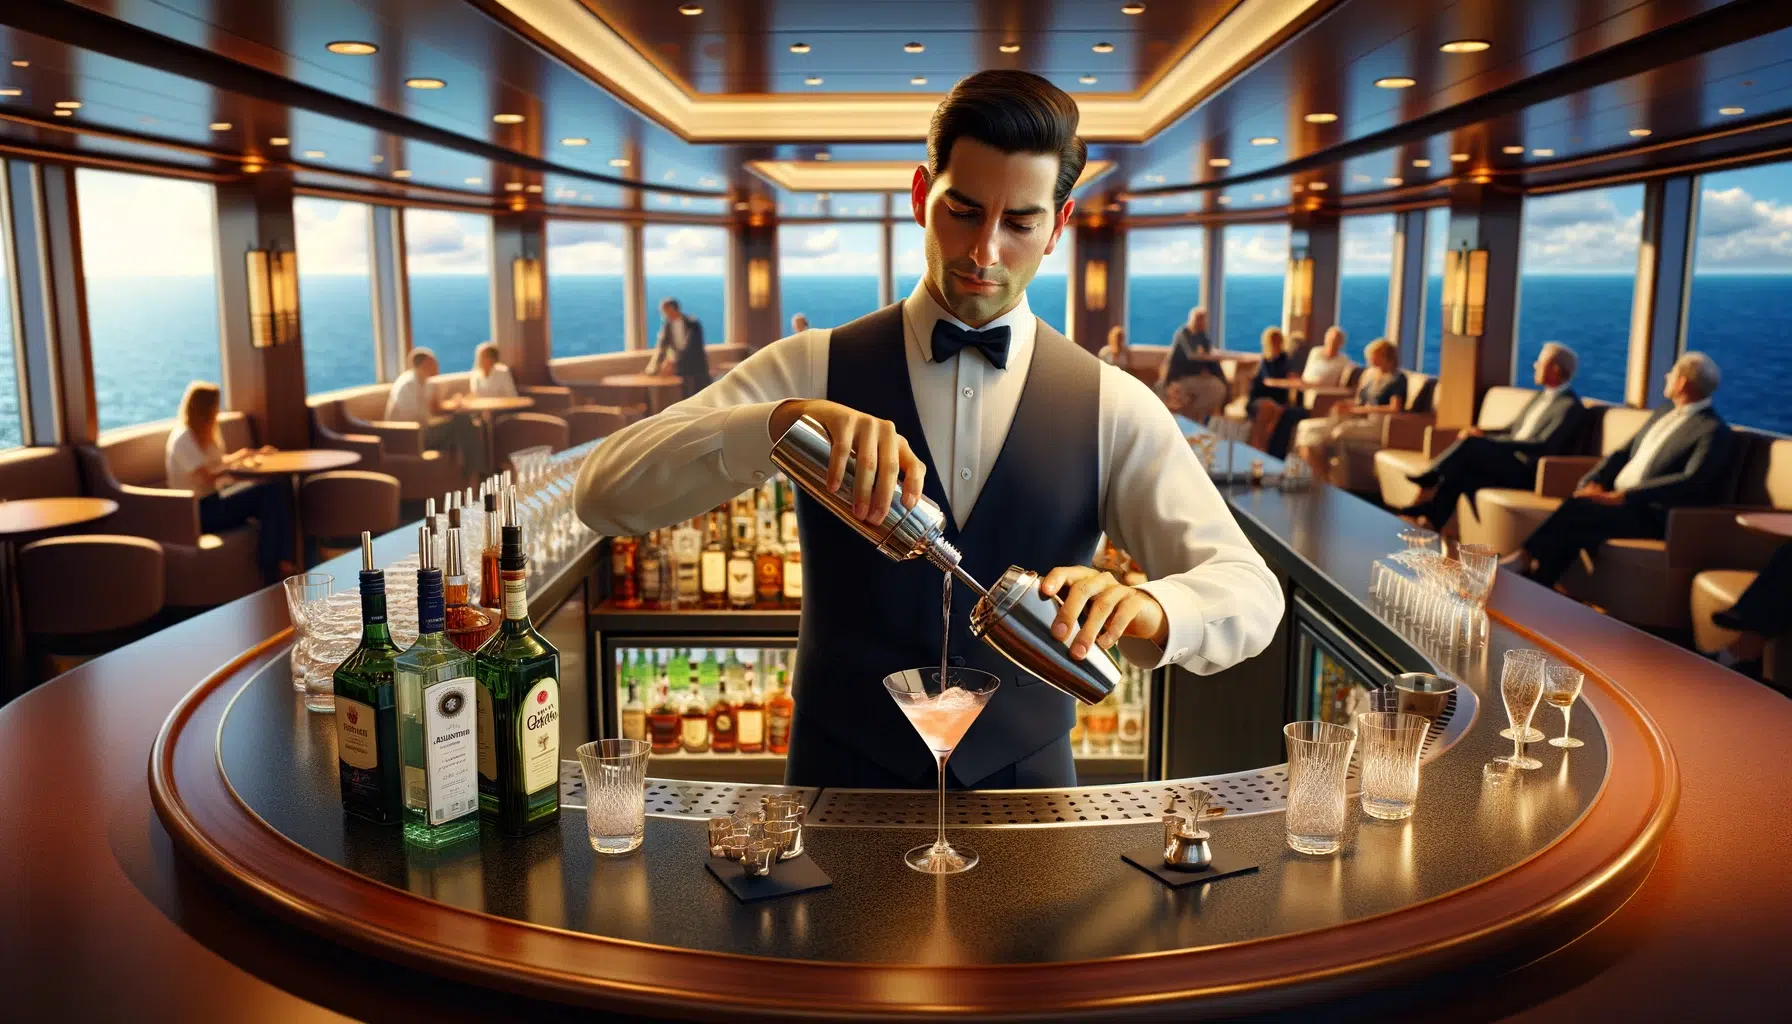 MSC Drink Packages Explained with Prices